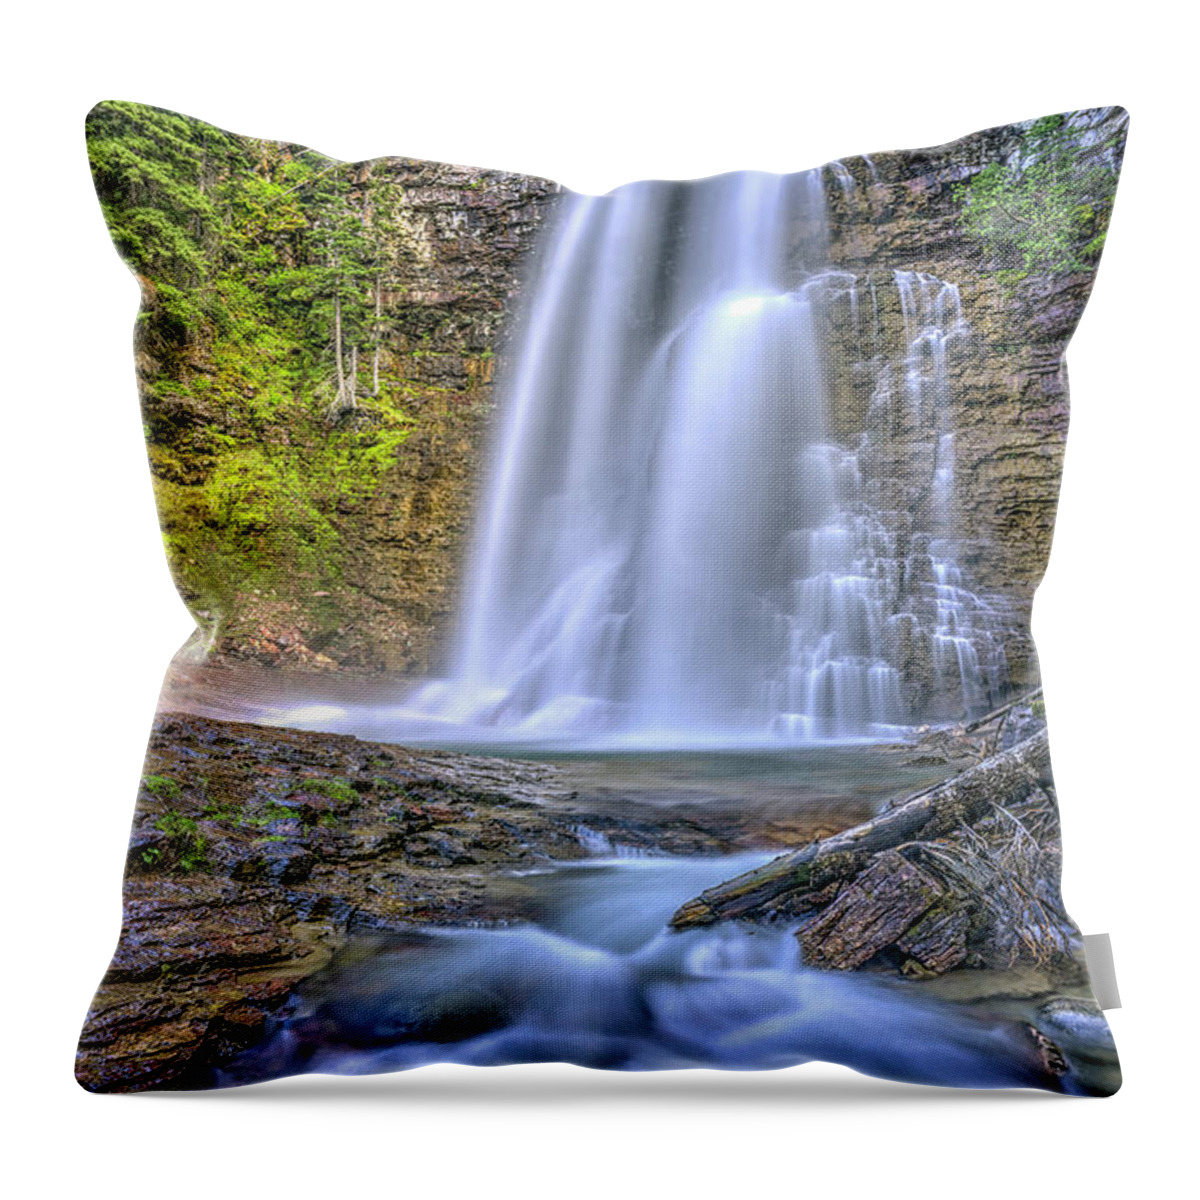 The Powerful And Towering Cascading Virginia Falls At Glacier Na Throw Pillow featuring the photograph Simplest things can turn out to be amazing by Carolyn Hall